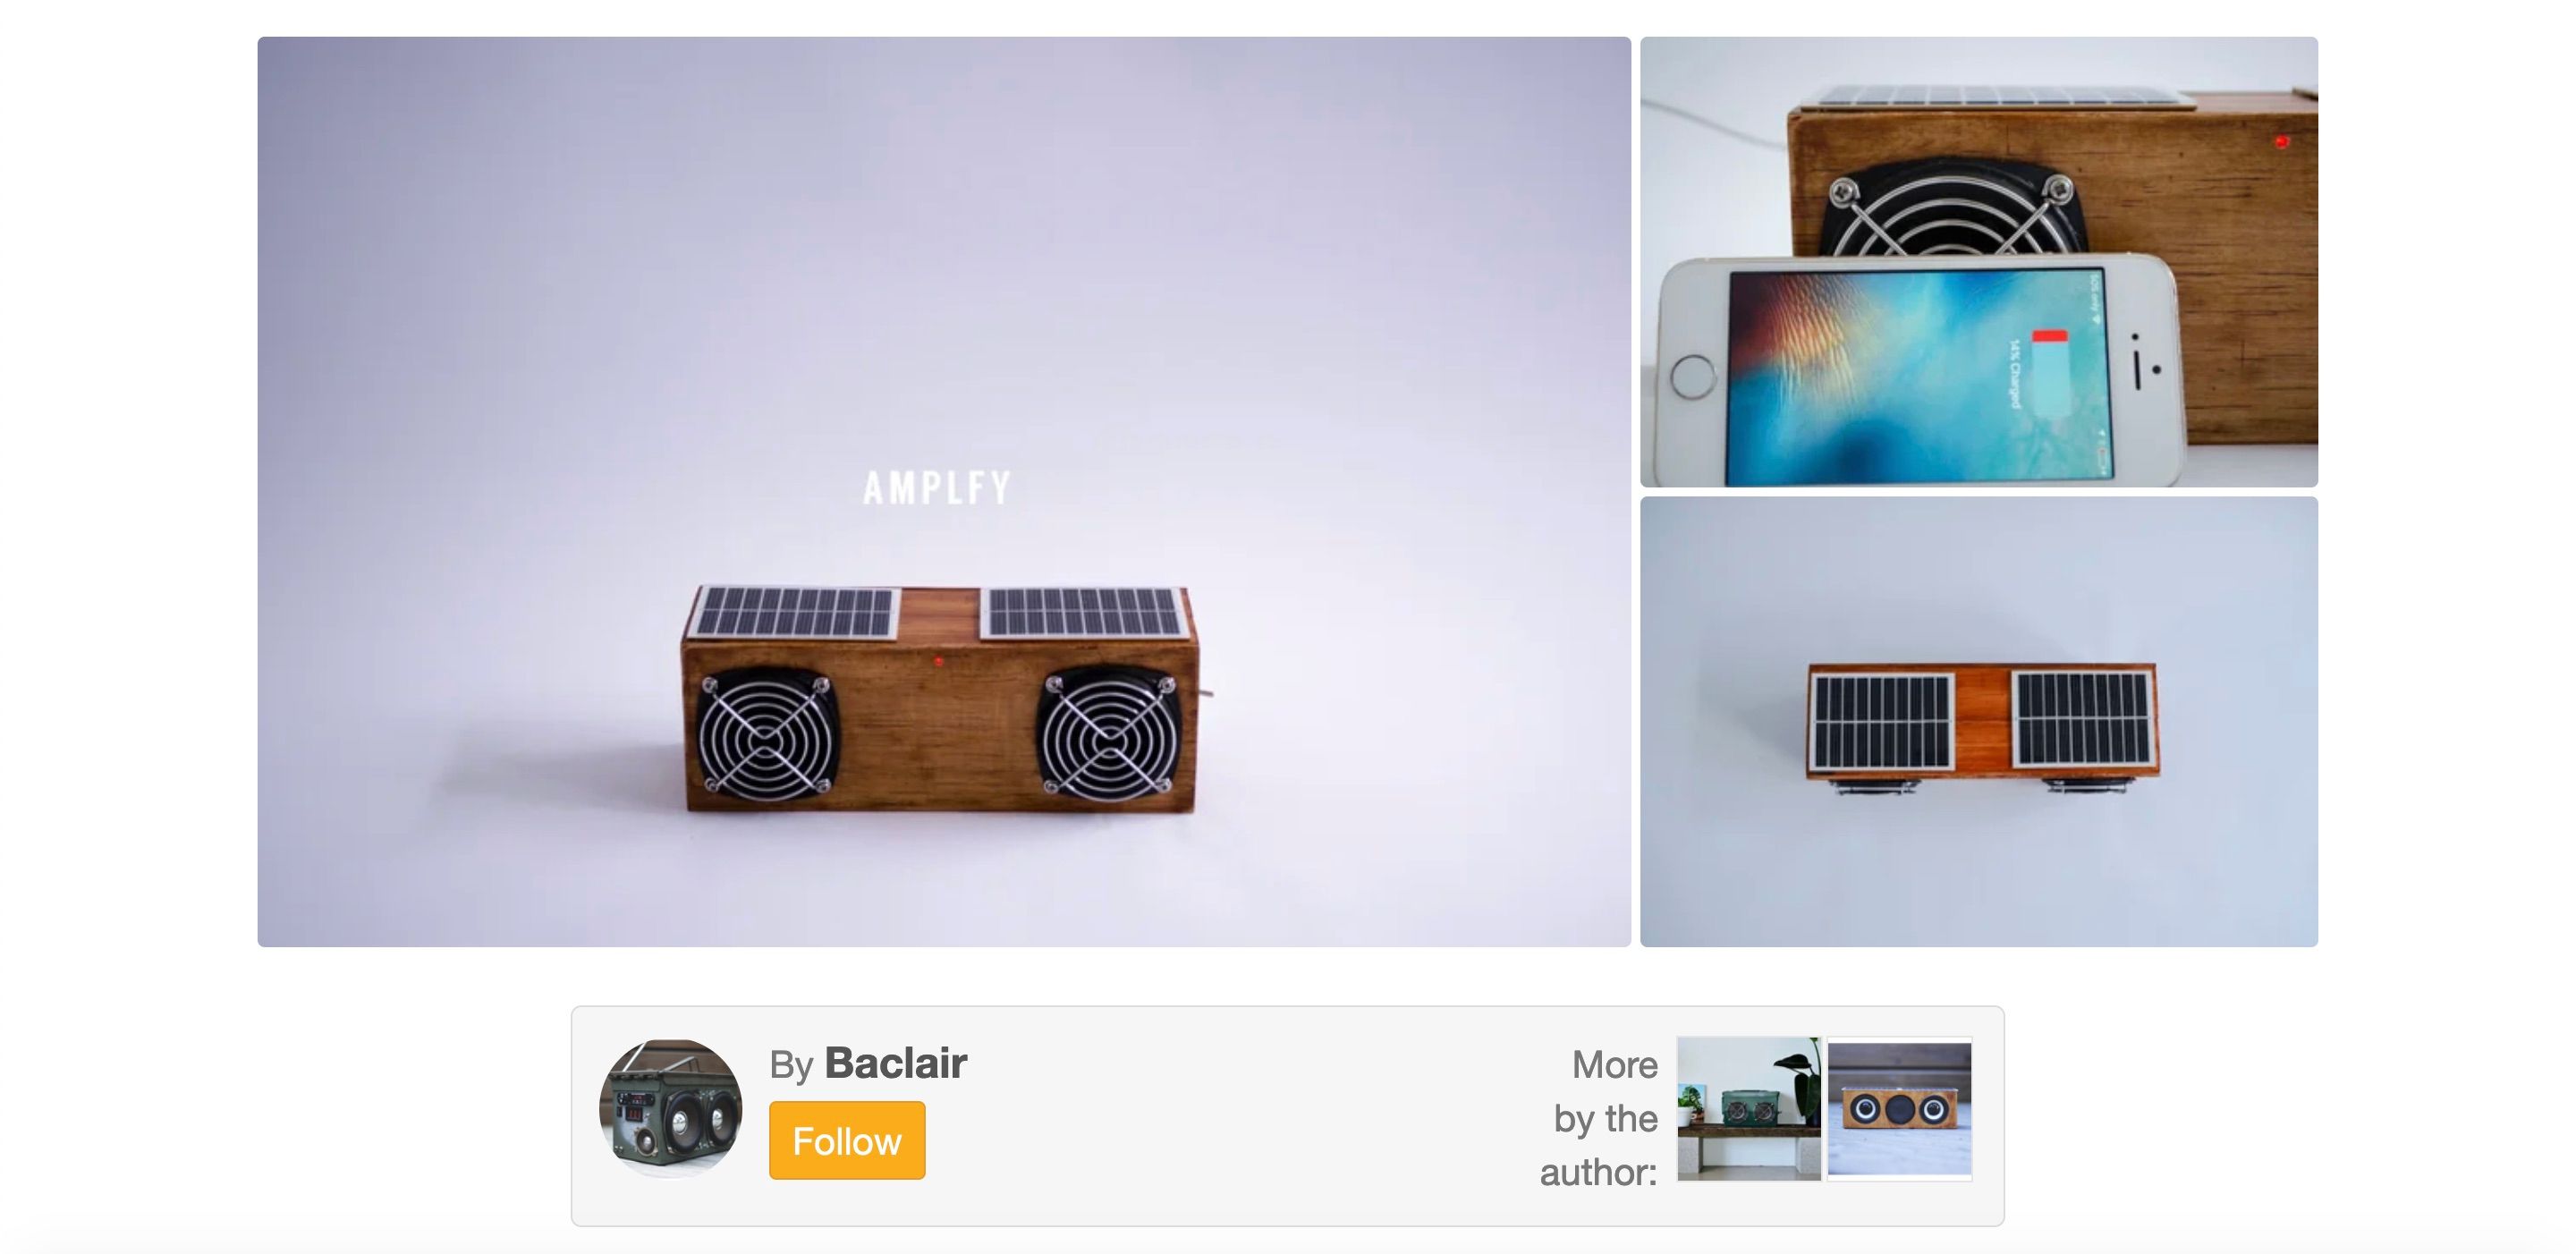 A screenshot showing a photo of a small wooden speaker with solar panels integrated on top